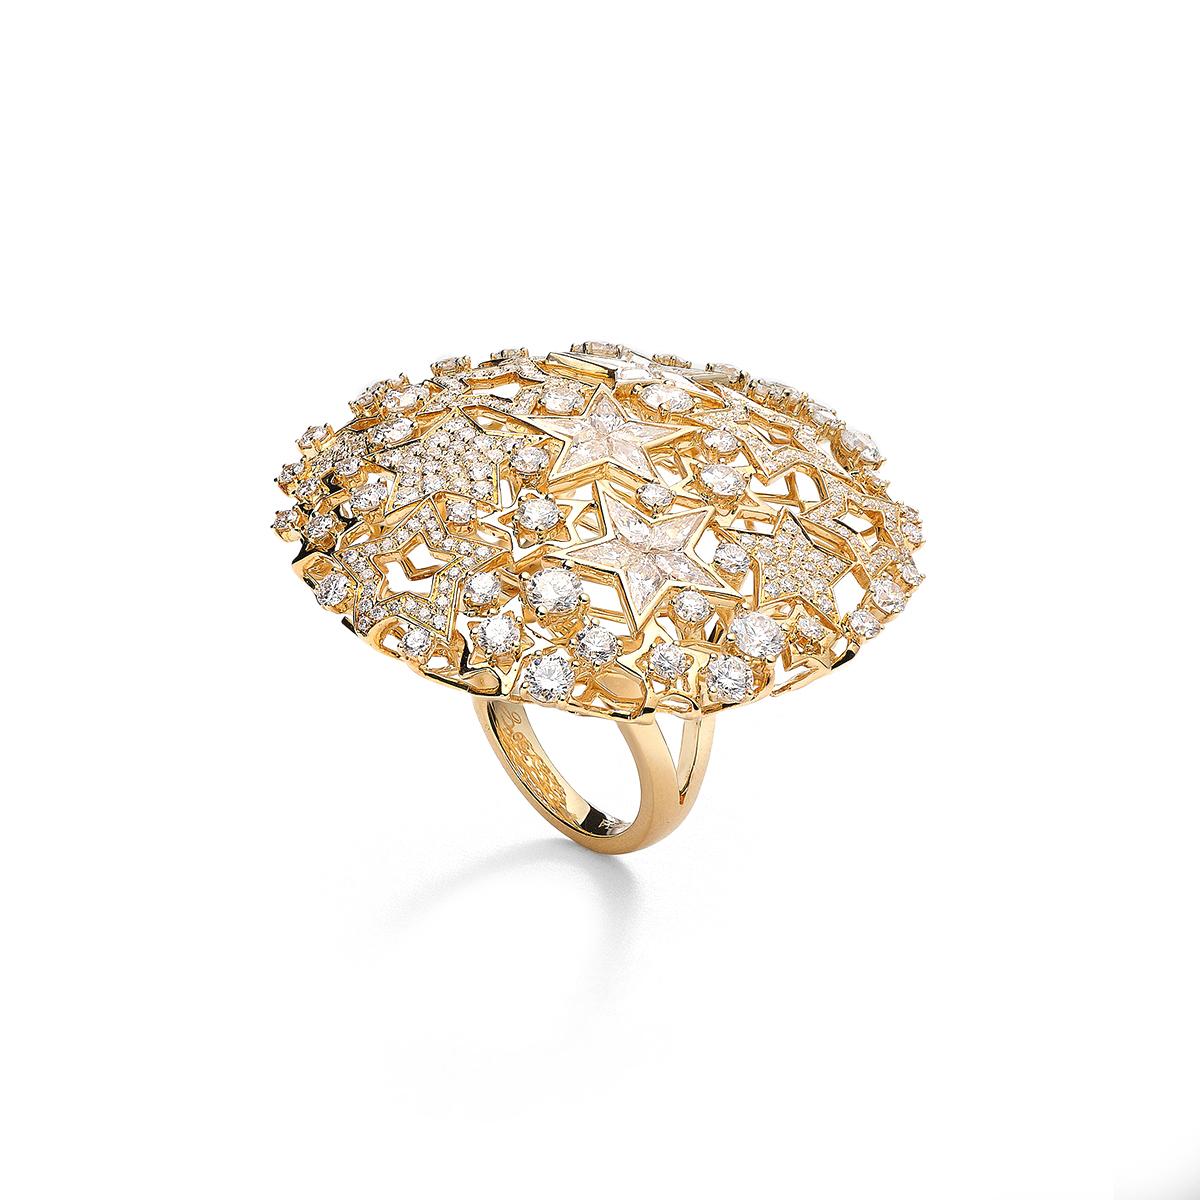 Star ring in 18kt yellow gold set with 213 diamonds 3.88 cts and 15 stars diamonds  1.88 cts Size 54        